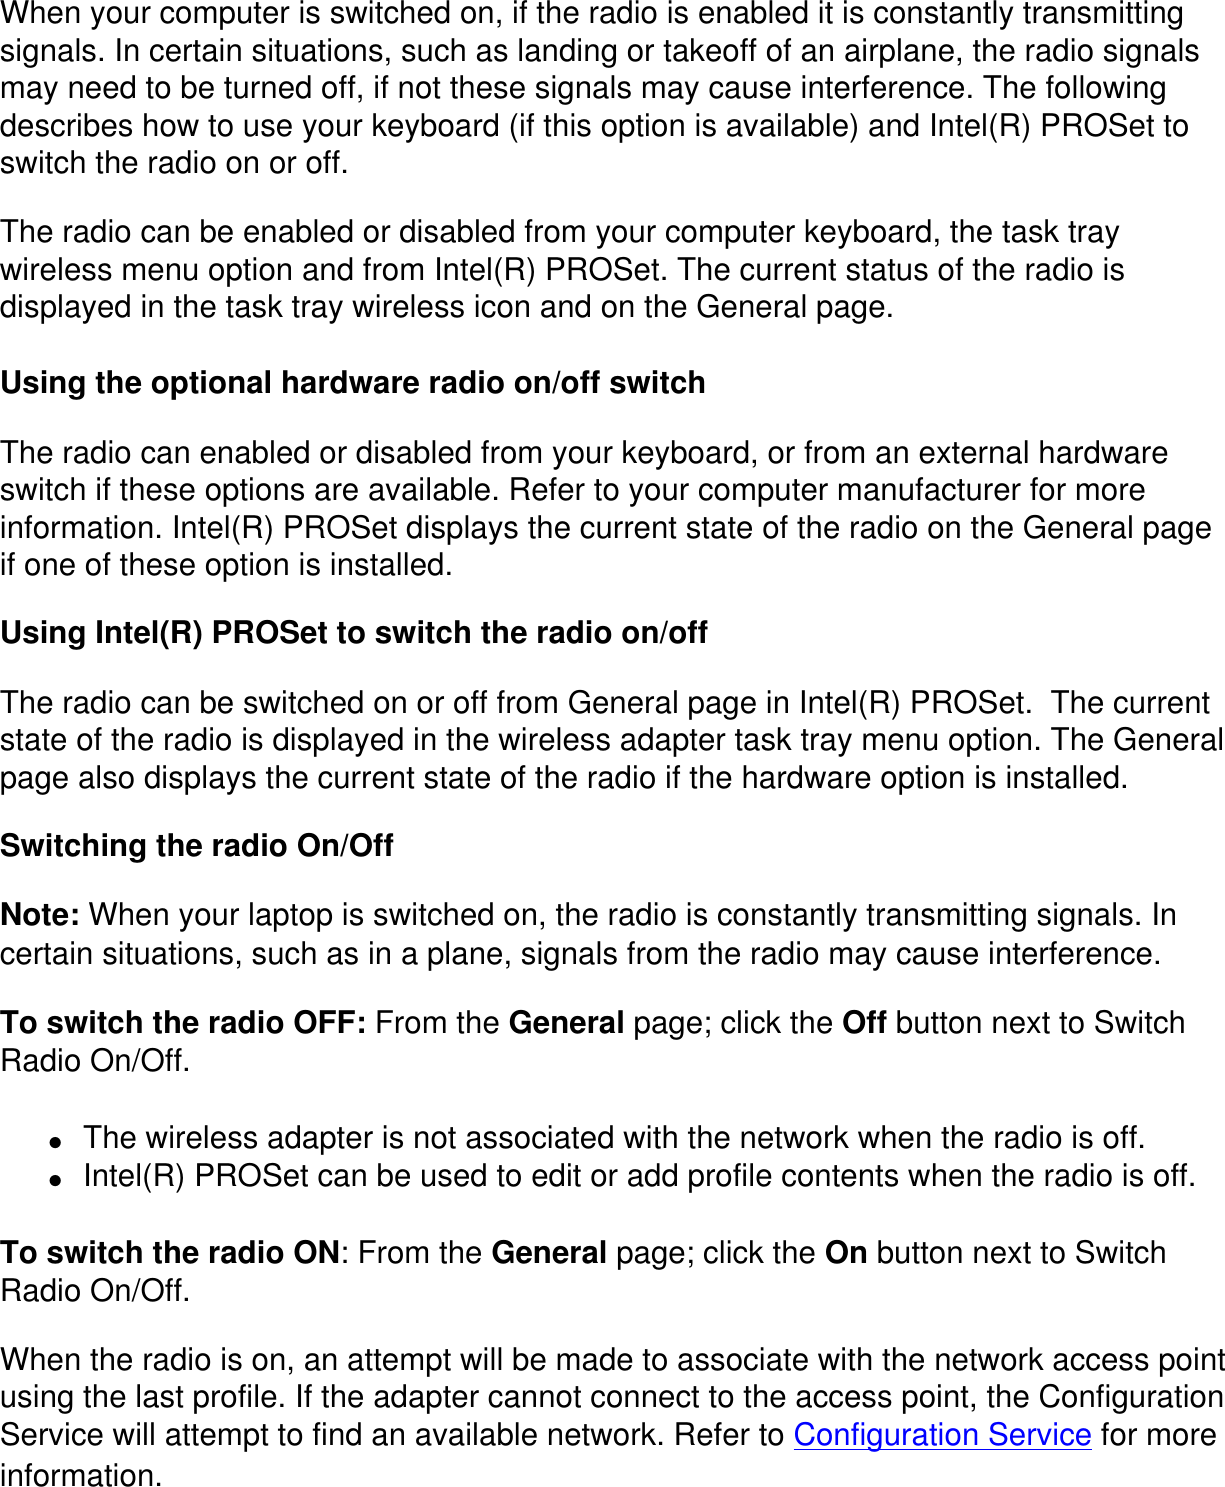 When your computer is switched on, if the radio is enabled it is constantly transmitting signals. In certain situations, such as landing or takeoff of an airplane, the radio signals may need to be turned off, if not these signals may cause interference. The following describes how to use your keyboard (if this option is available) and Intel(R) PROSet to switch the radio on or off.The radio can be enabled or disabled from your computer keyboard, the task tray wireless menu option and from Intel(R) PROSet. The current status of the radio is displayed in the task tray wireless icon and on the General page.Using the optional hardware radio on/off switchThe radio can enabled or disabled from your keyboard, or from an external hardware switch if these options are available. Refer to your computer manufacturer for more information. Intel(R) PROSet displays the current state of the radio on the General page if one of these option is installed.Using Intel(R) PROSet to switch the radio on/offThe radio can be switched on or off from General page in Intel(R) PROSet.  The current state of the radio is displayed in the wireless adapter task tray menu option. The General page also displays the current state of the radio if the hardware option is installed.Switching the radio On/OffNote: When your laptop is switched on, the radio is constantly transmitting signals. In certain situations, such as in a plane, signals from the radio may cause interference.To switch the radio OFF: From the General page; click the Off button next to Switch Radio On/Off. ●     The wireless adapter is not associated with the network when the radio is off.●     Intel(R) PROSet can be used to edit or add profile contents when the radio is off.To switch the radio ON: From the General page; click the On button next to Switch Radio On/Off.When the radio is on, an attempt will be made to associate with the network access point using the last profile. If the adapter cannot connect to the access point, the Configuration Service will attempt to find an available network. Refer to Configuration Service for more information.